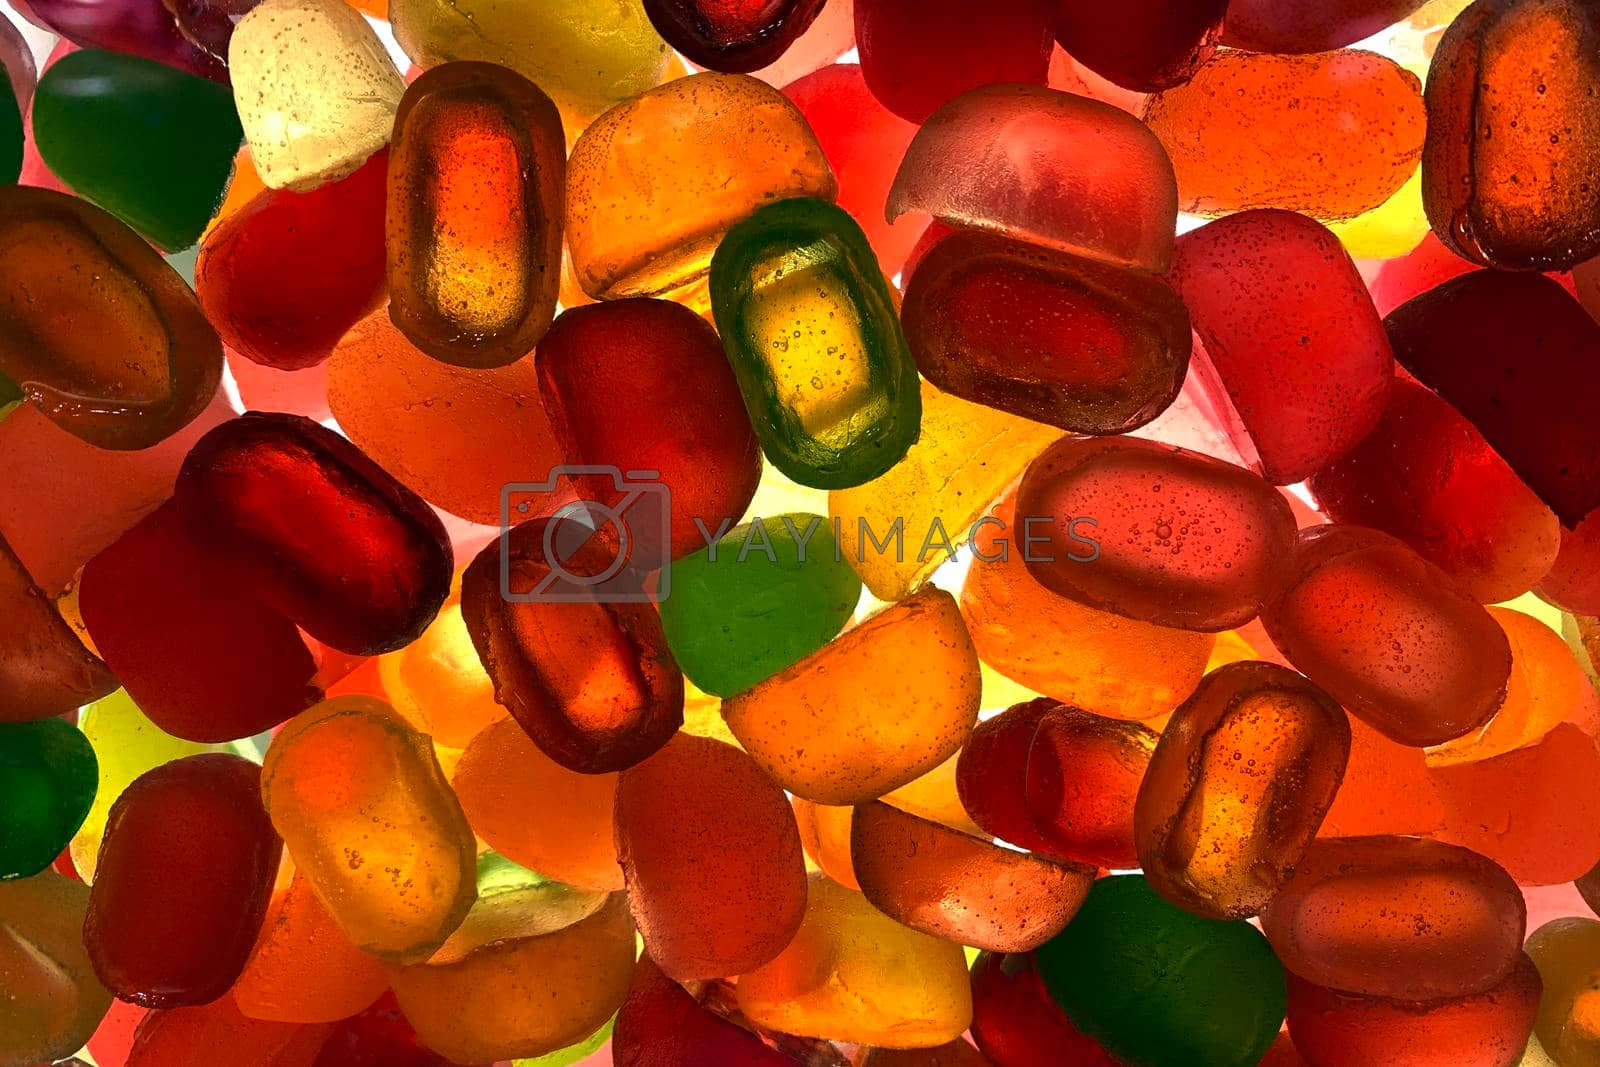 Royalty free image of Silhouette of many multi colored yummy bright candies in different shapes. by Khosro1